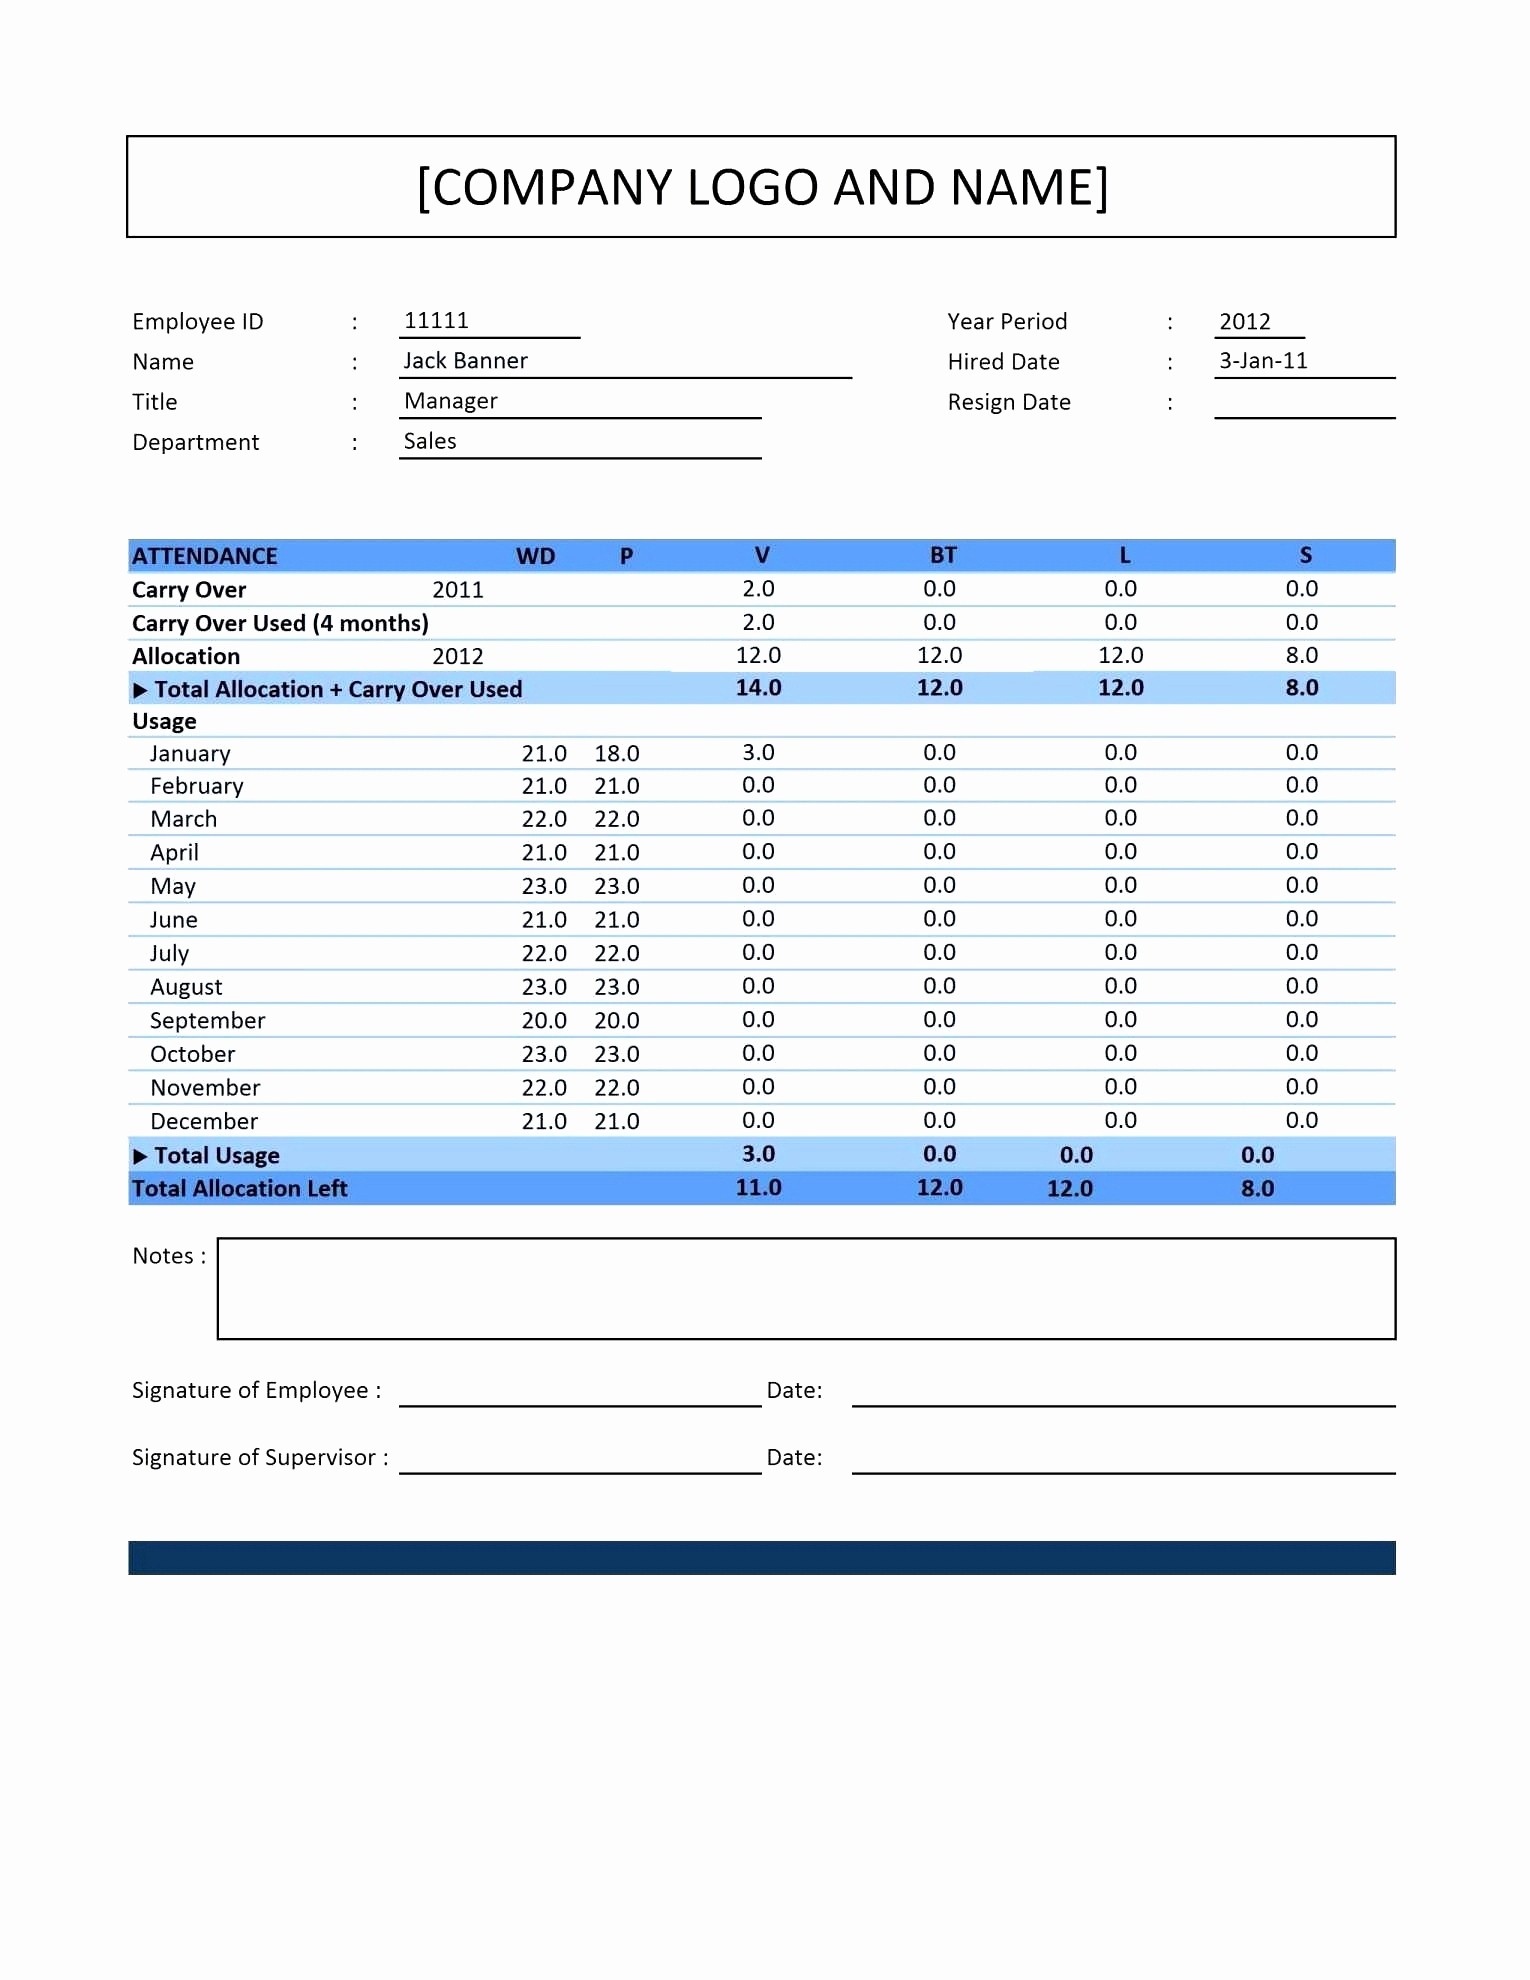 Vacation Accrual Spreadsheet Lovely Employee Document Excel